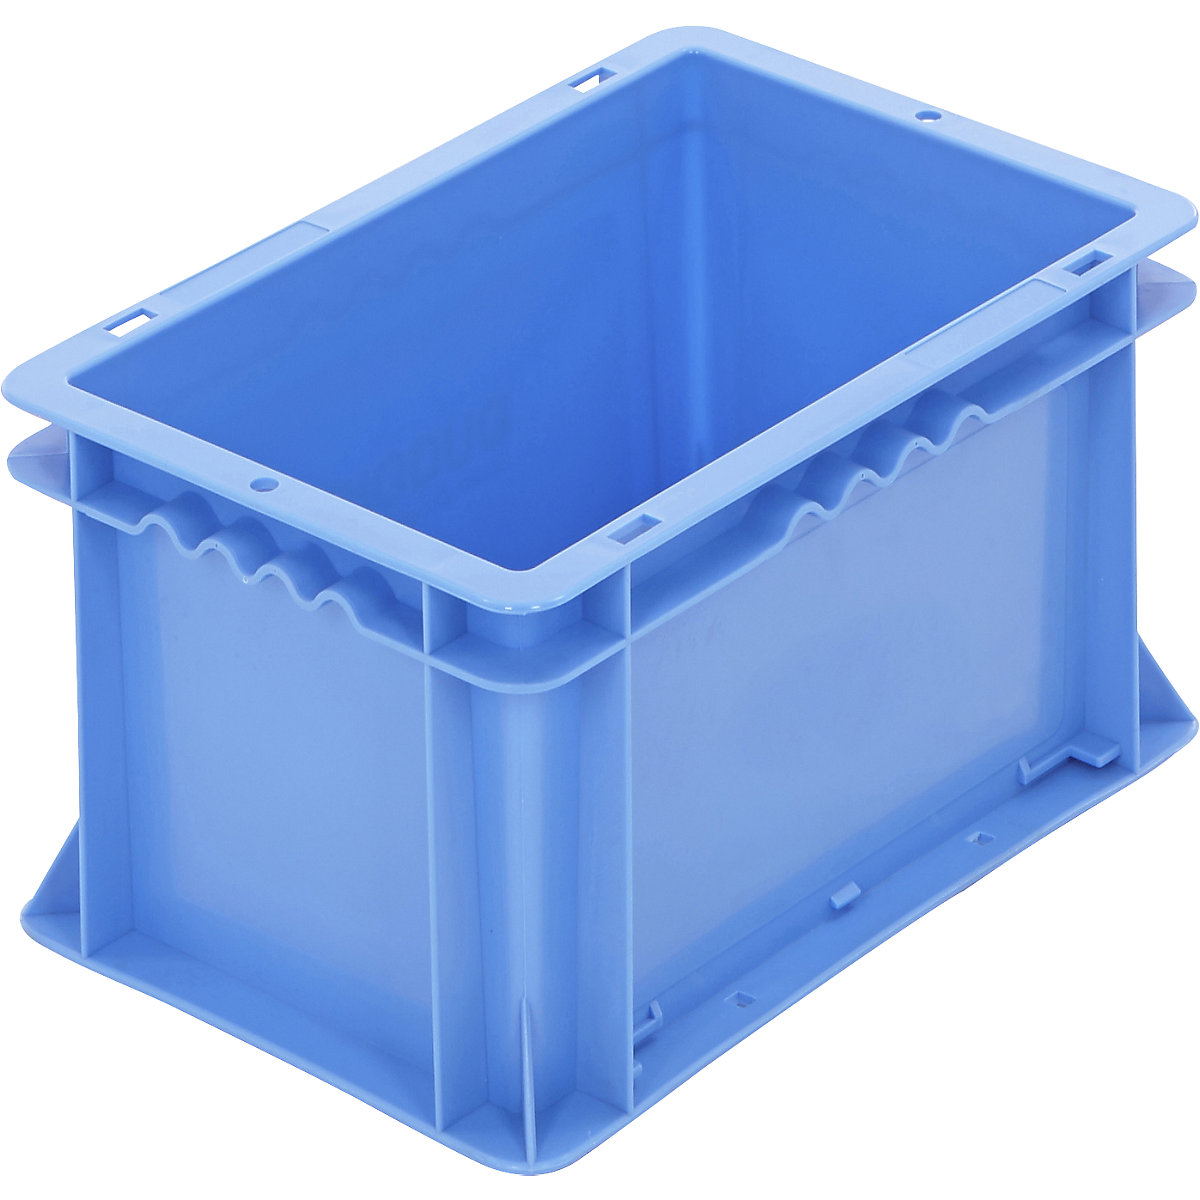 Euro stacking container, capacity 6 litre, blue-6